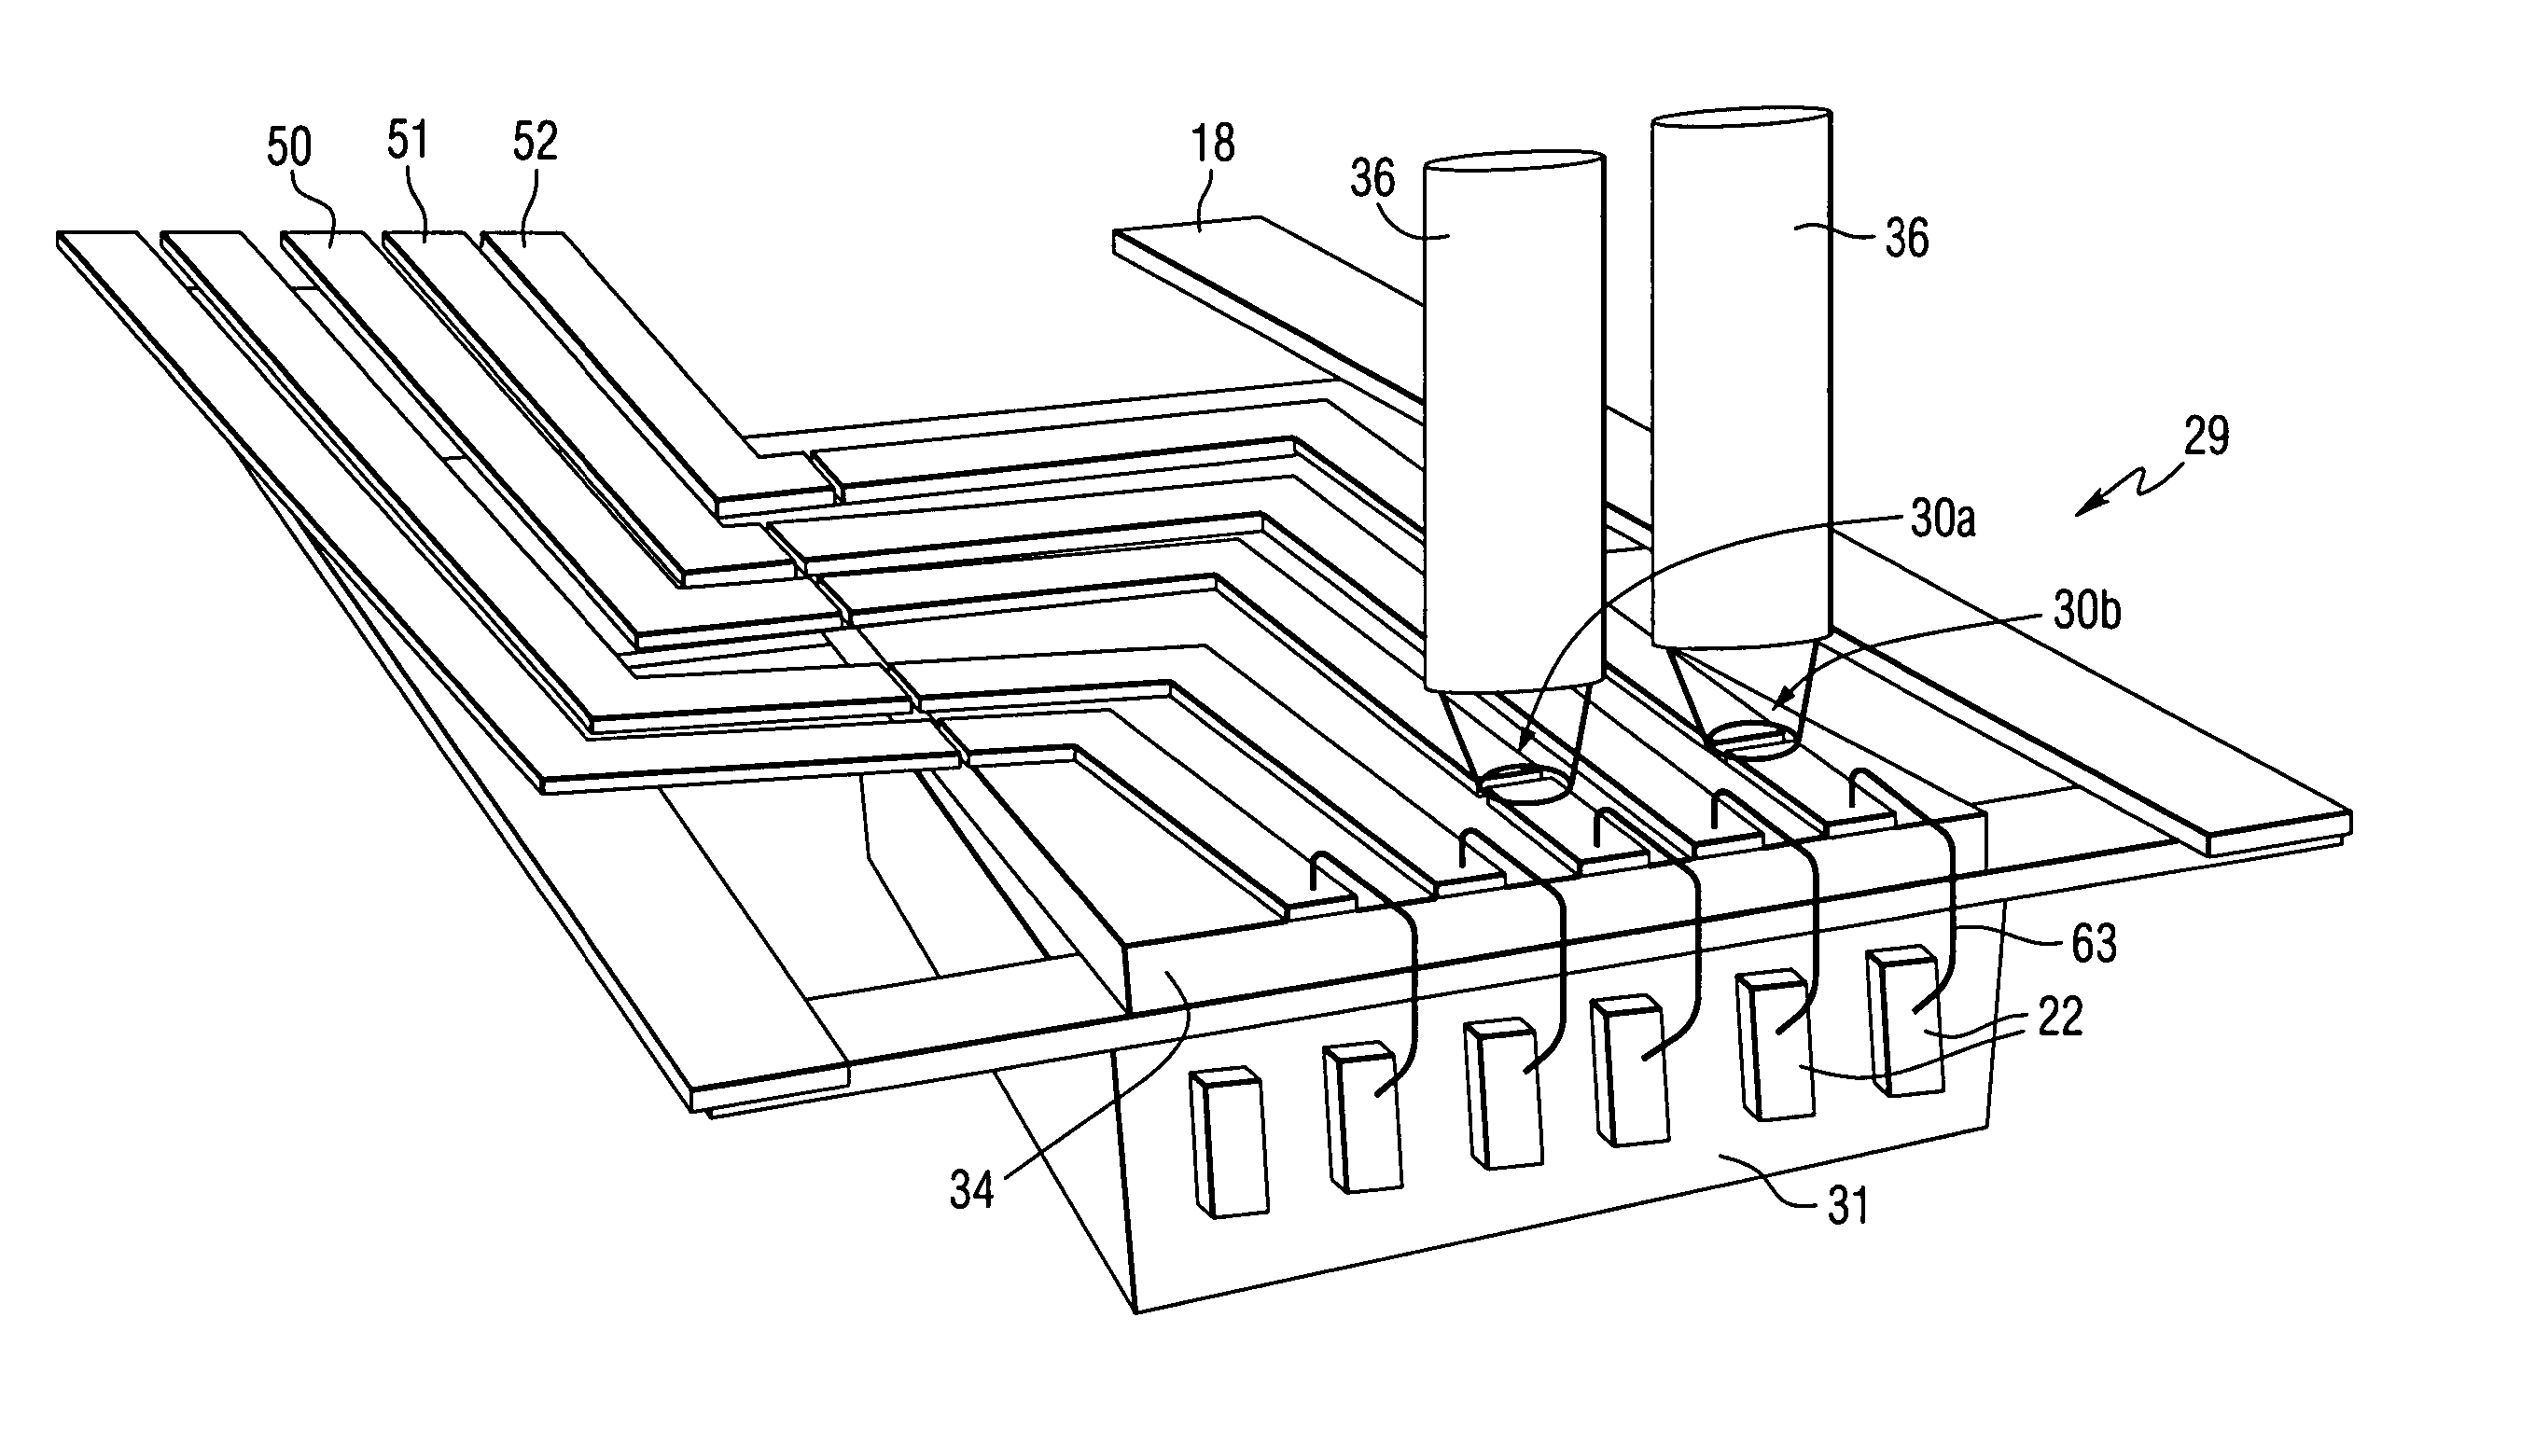 Photoconductive optical write driver for magnetic recording